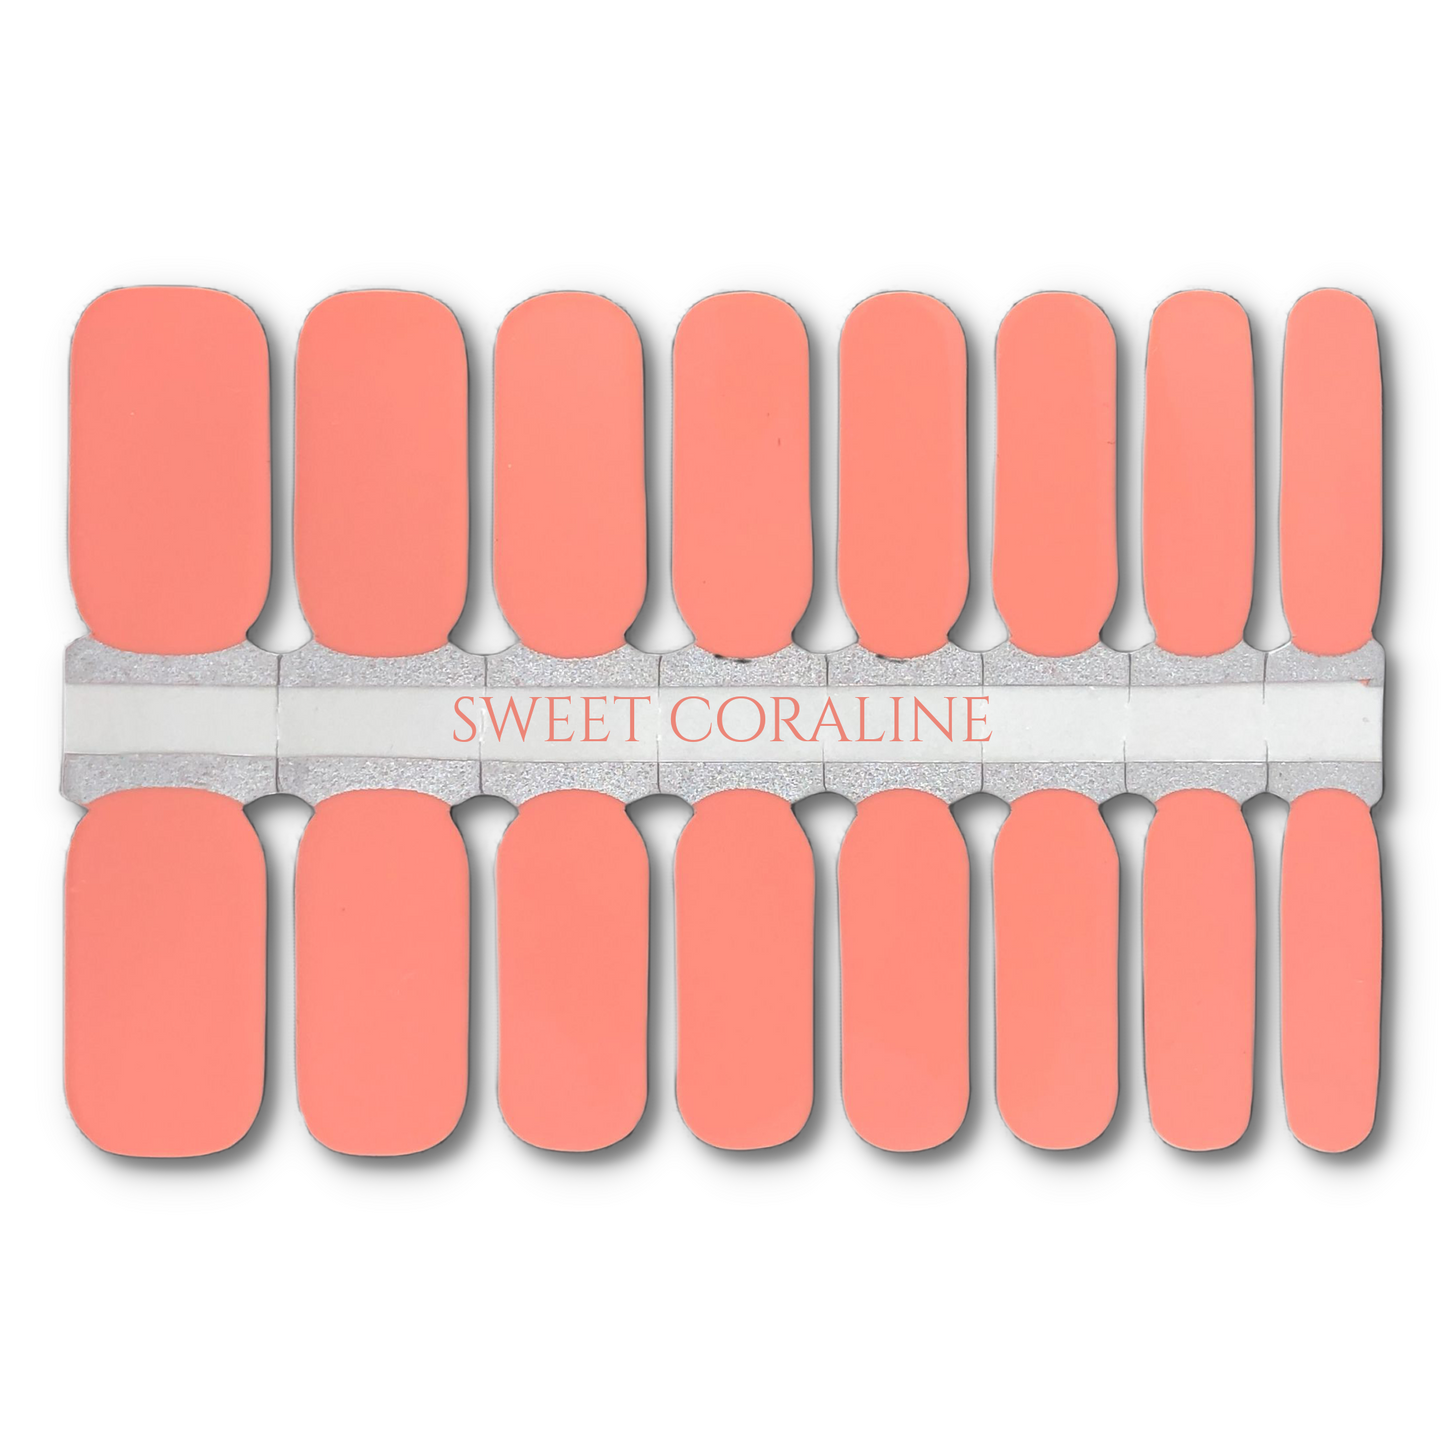 16 Real nail polish strips also called nail wraps or nail stickers. A pretty coral in a cream finish.